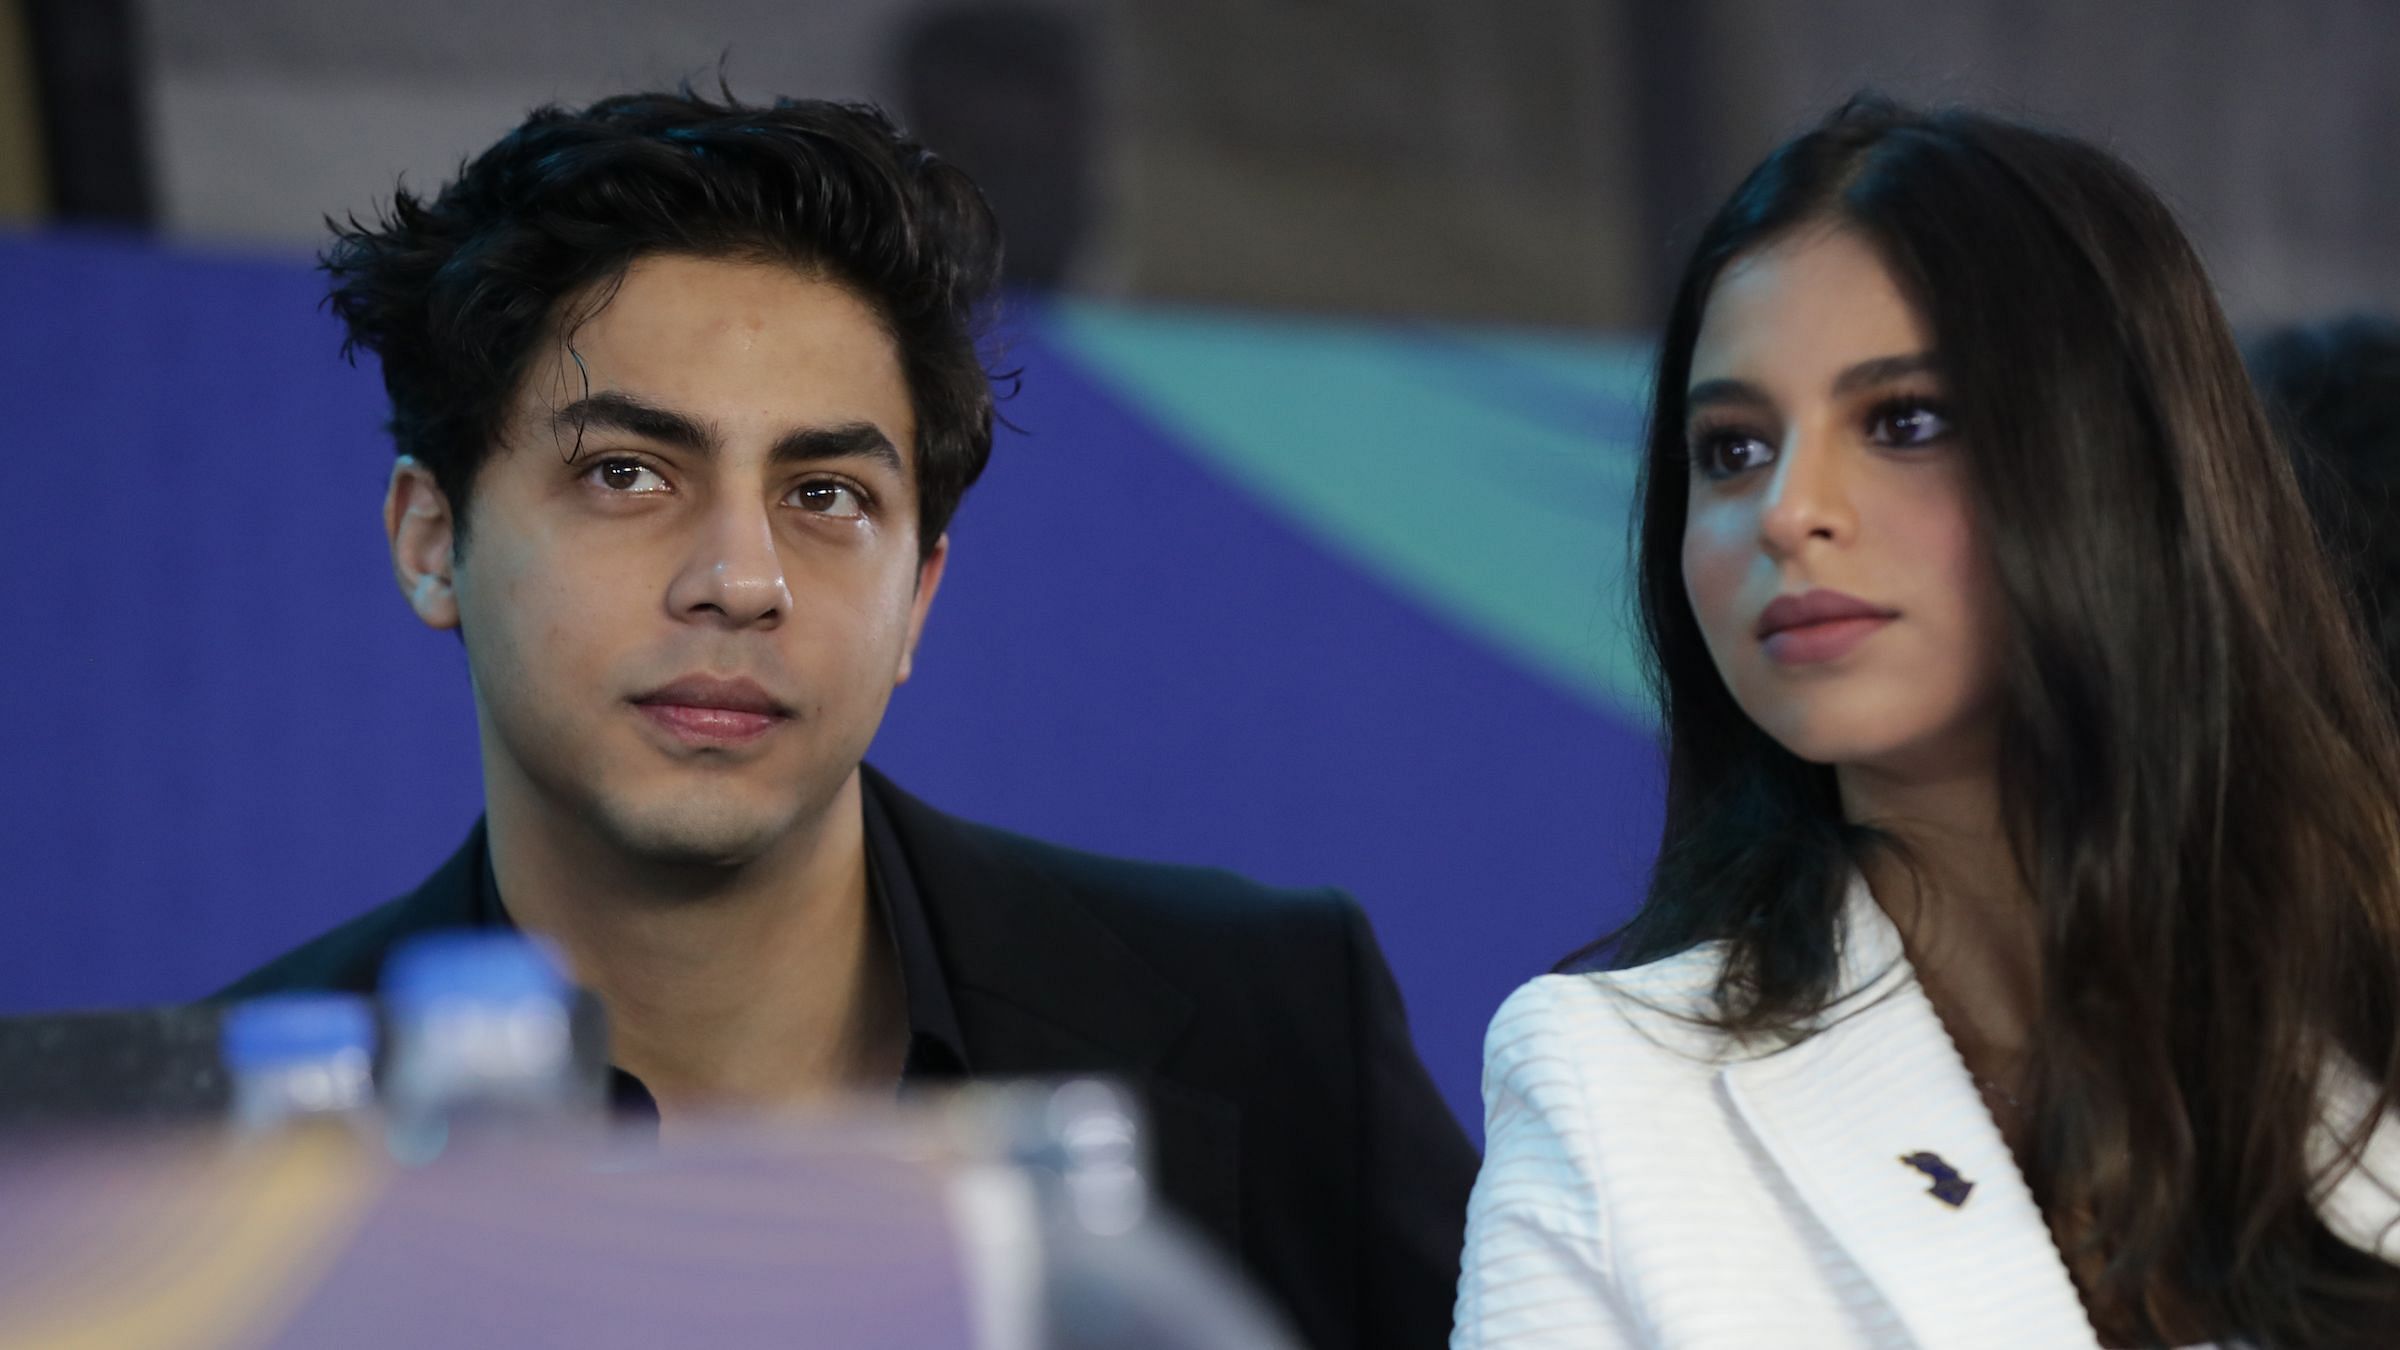 Aryan Khan Appears at IPL Pre-Auction 2022, First Time After Drug Case Controversy